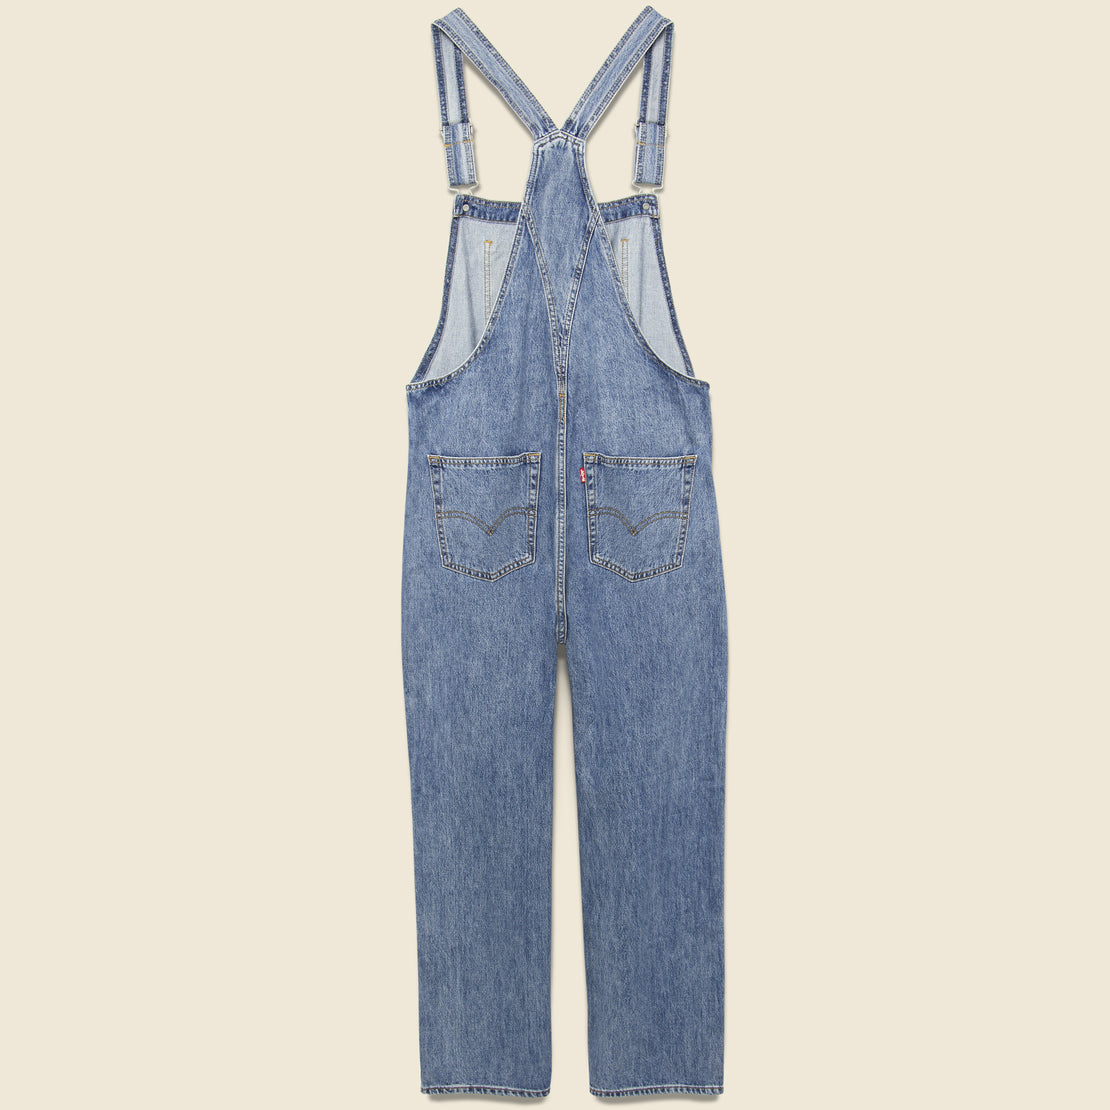 Vintage Overall - Dead Stone - Levis Premium - STAG Provisions - W - Onepiece - Overalls